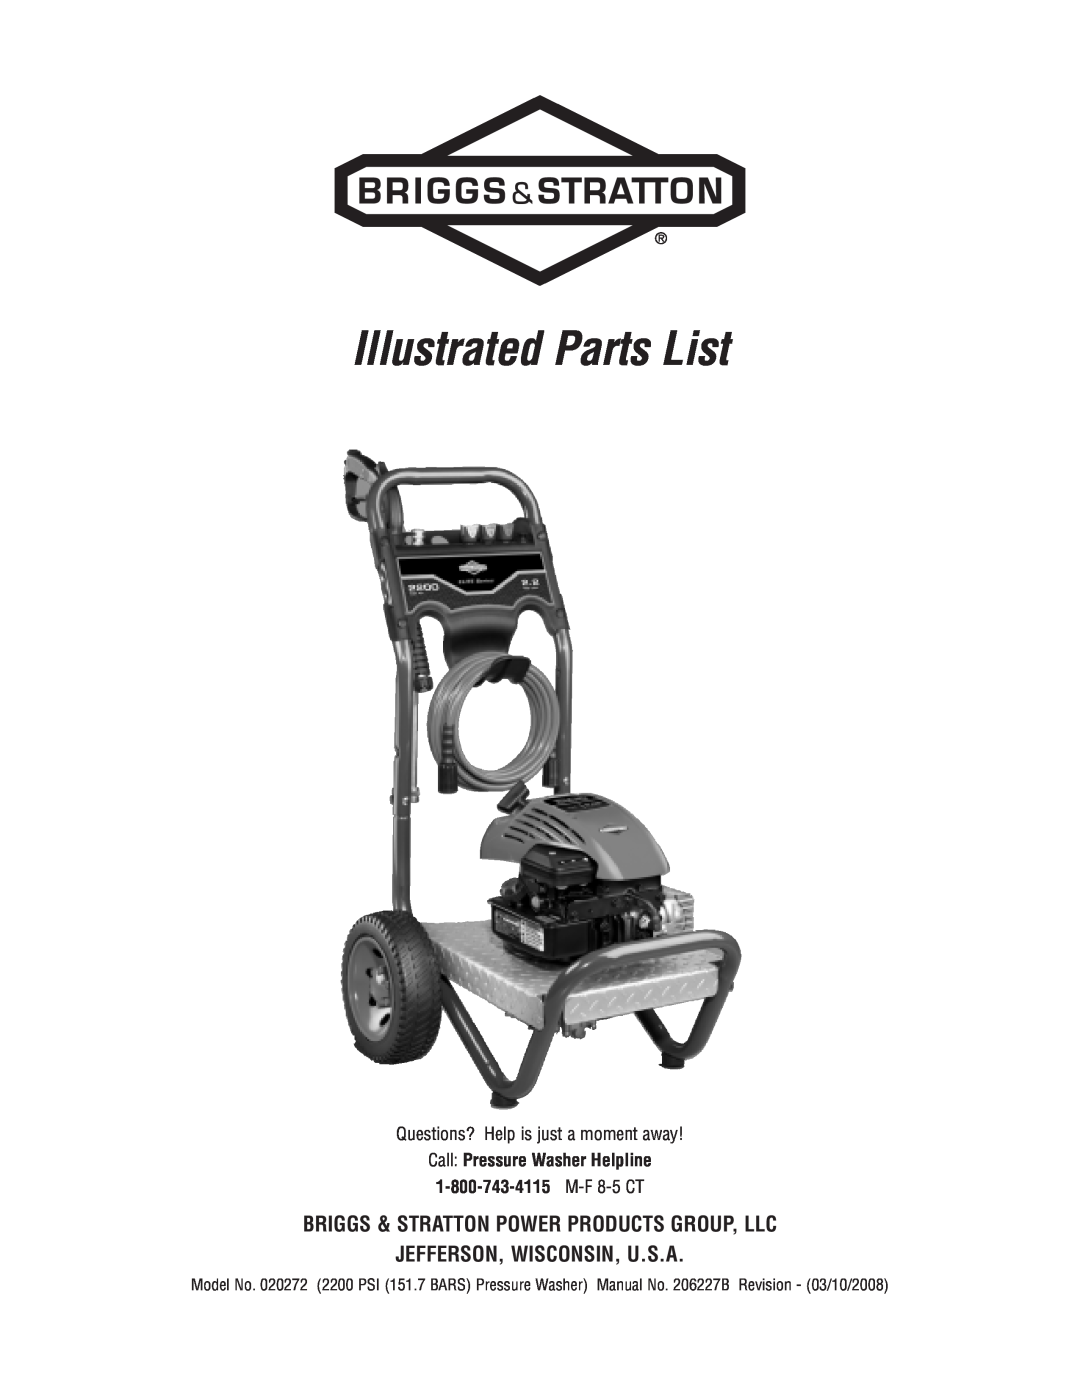 Briggs & Stratton 20272 manual Illustrated Parts List, Briggs & Stratton Power Products Group, Llc 